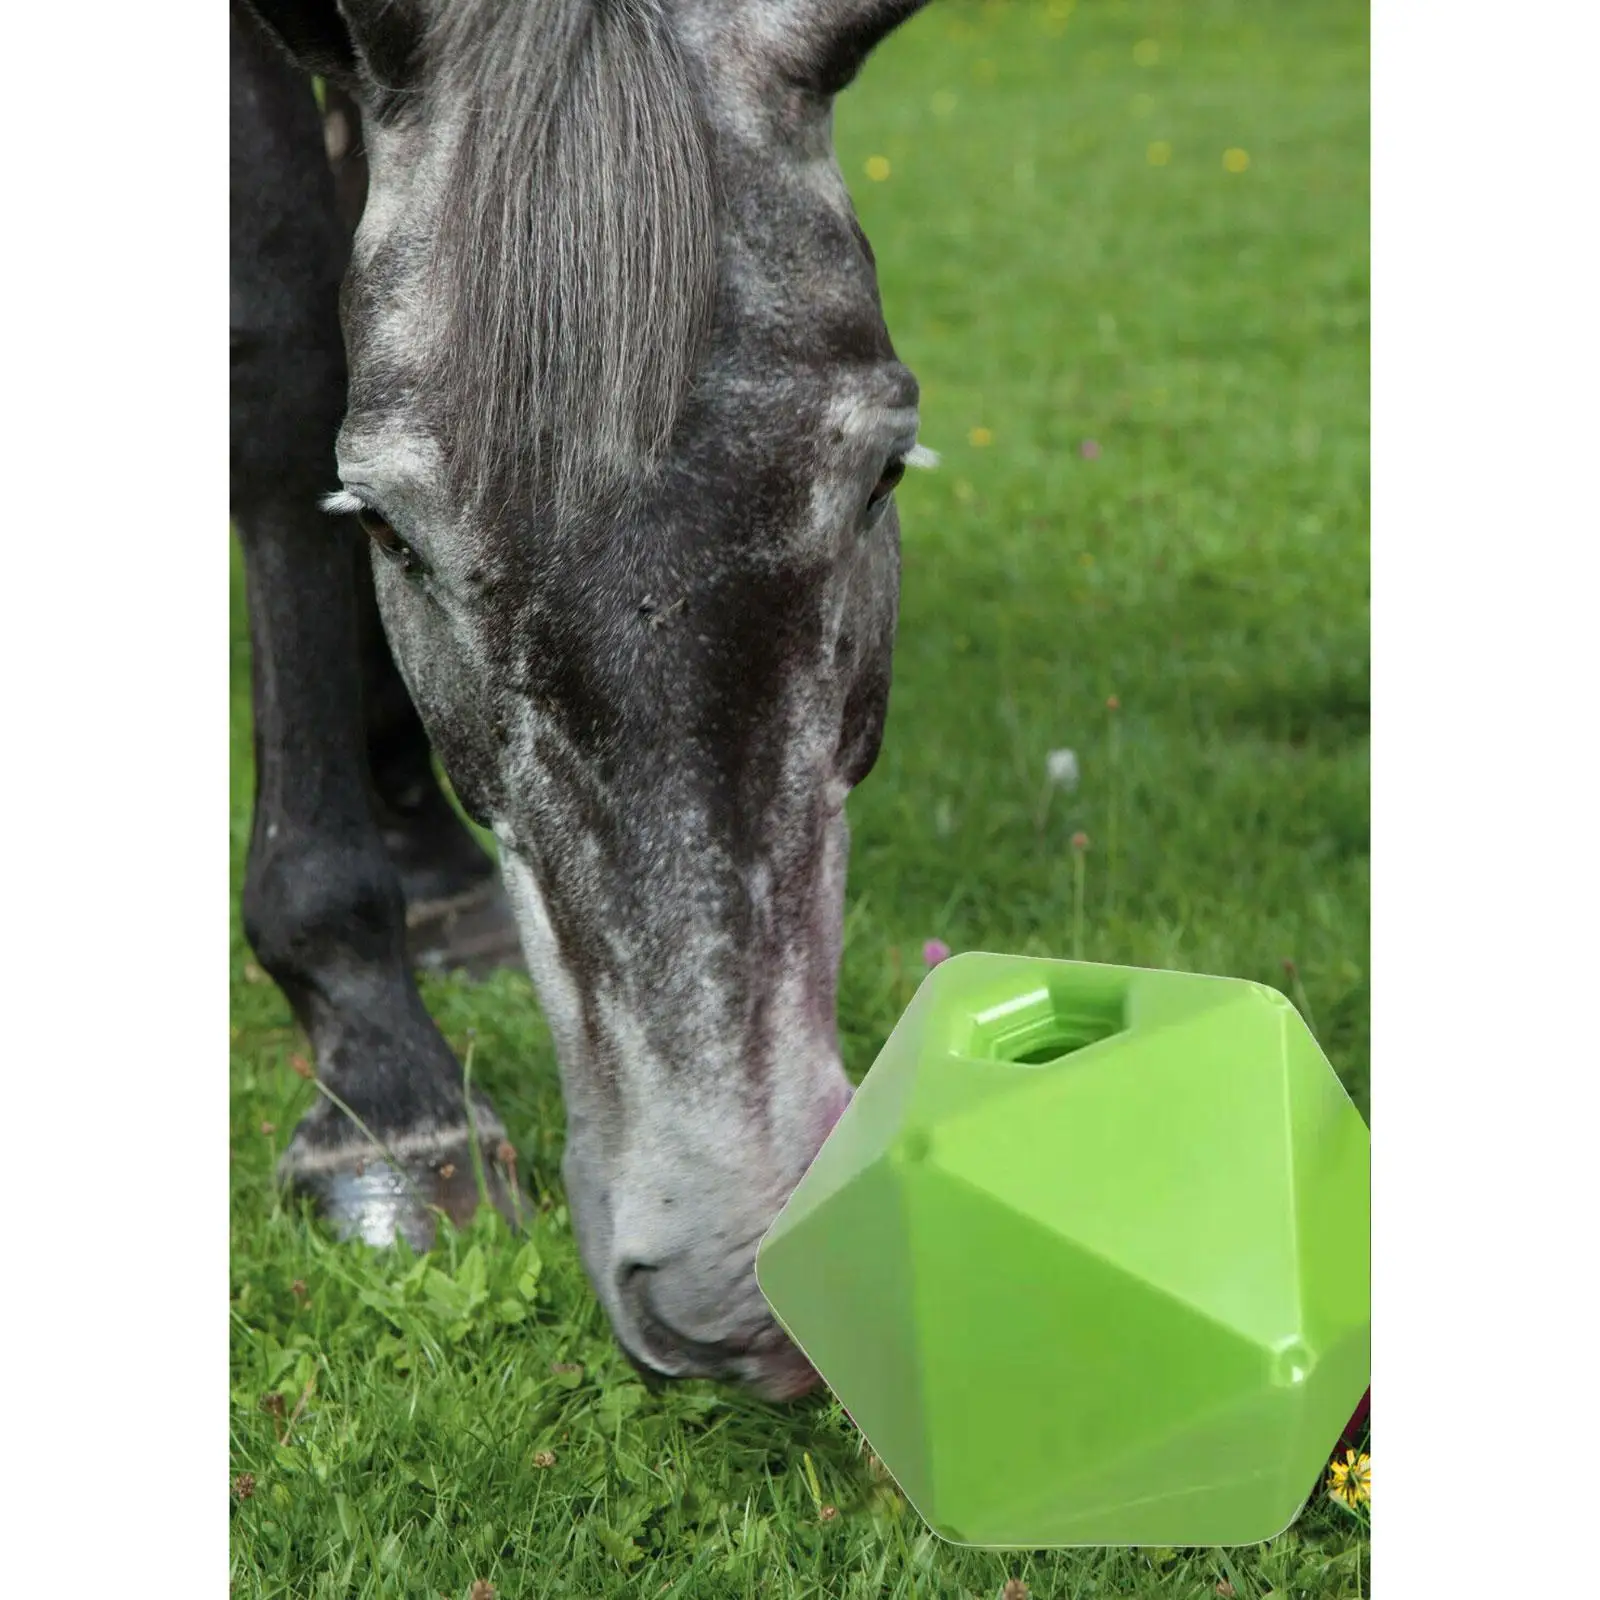 Funny Horse Treat Ball Feeding Toys Accessories Play Equestrian Stable Ball for Equine Cow Farmhouse Lawn